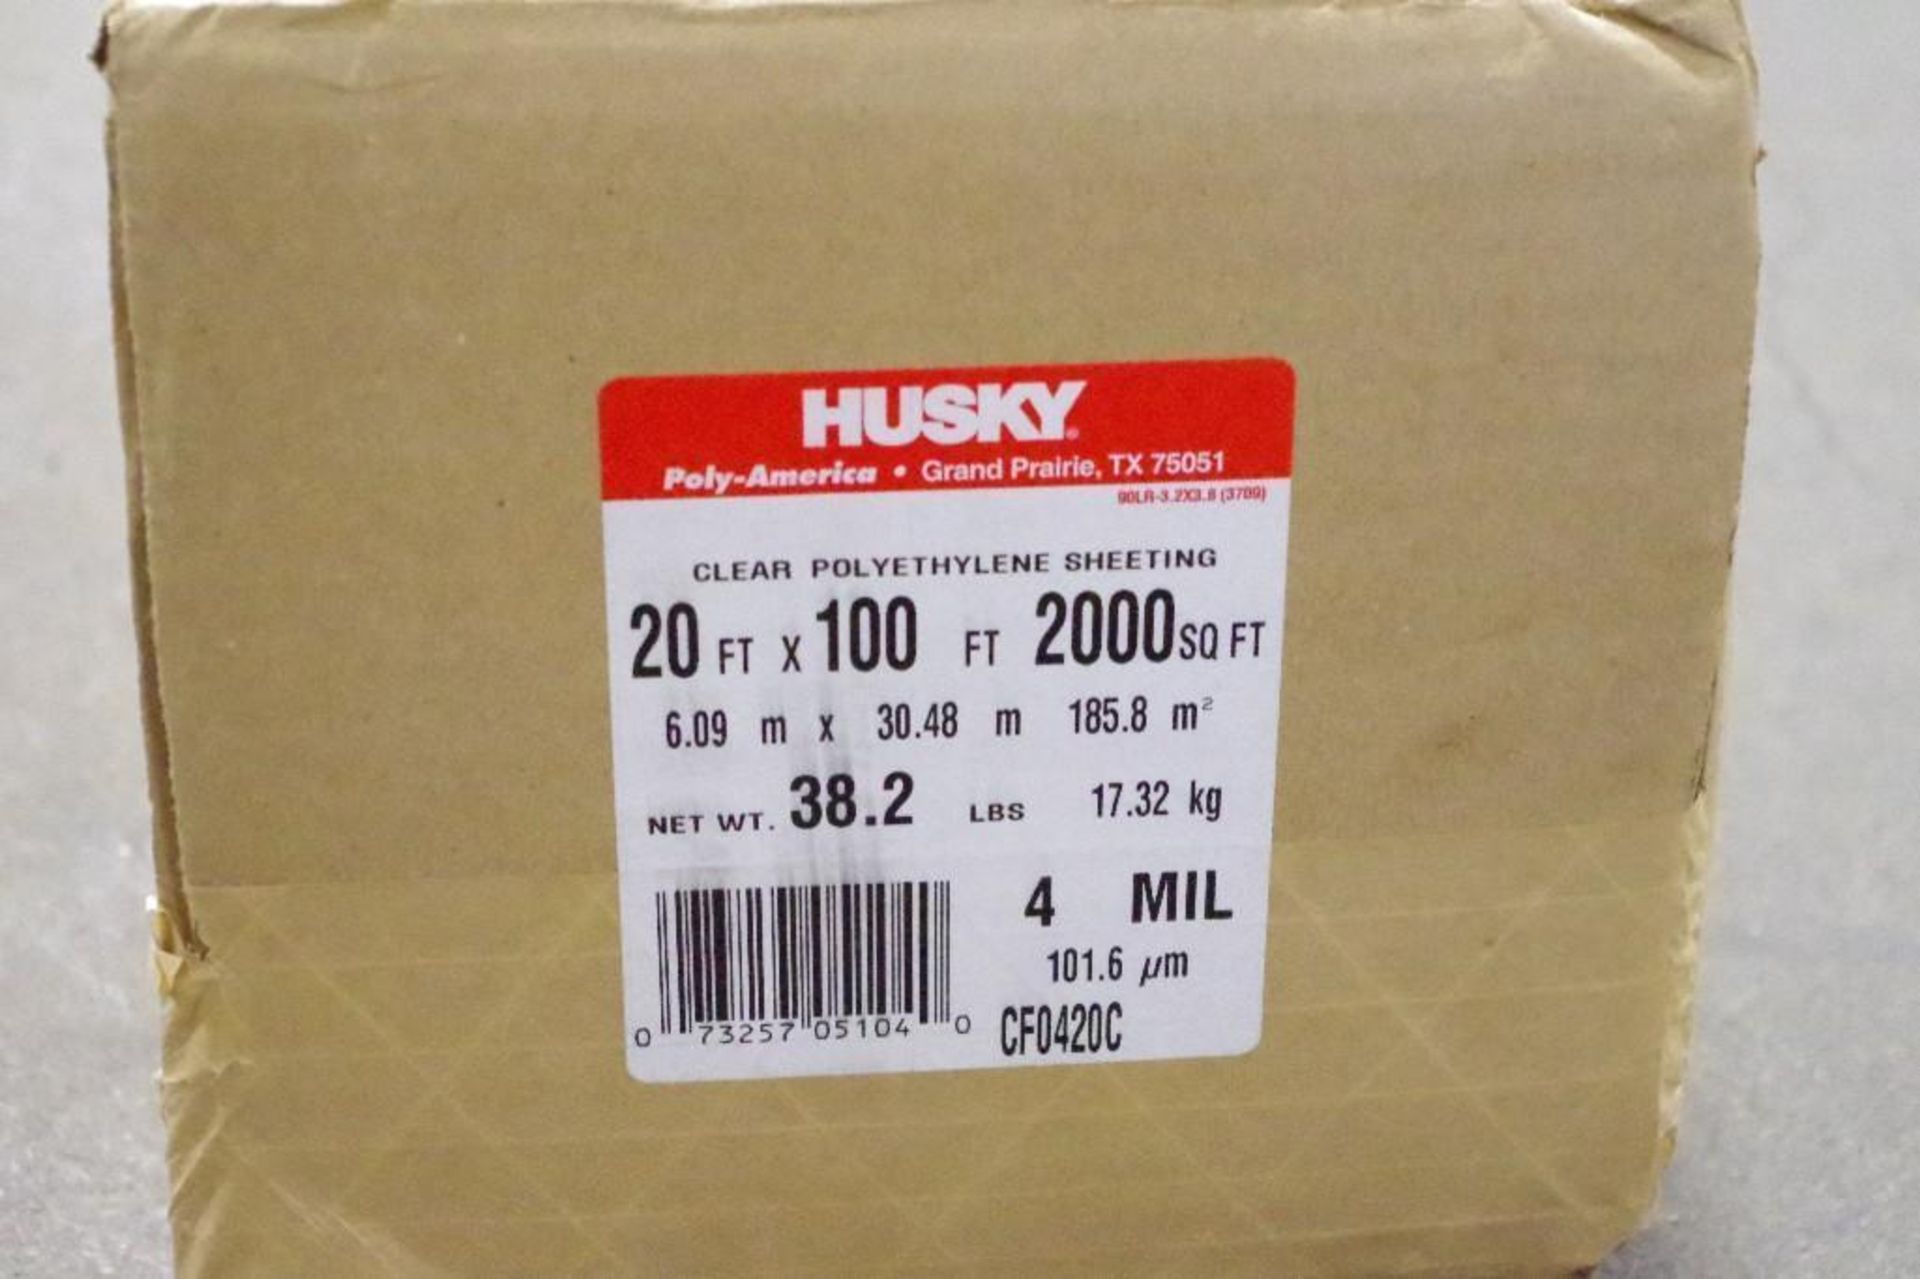 NEW HUSKY 4 MIL Clear Polyethylene / Plastic Sheeting 20' x 100' Roll (see description) - Image 3 of 3